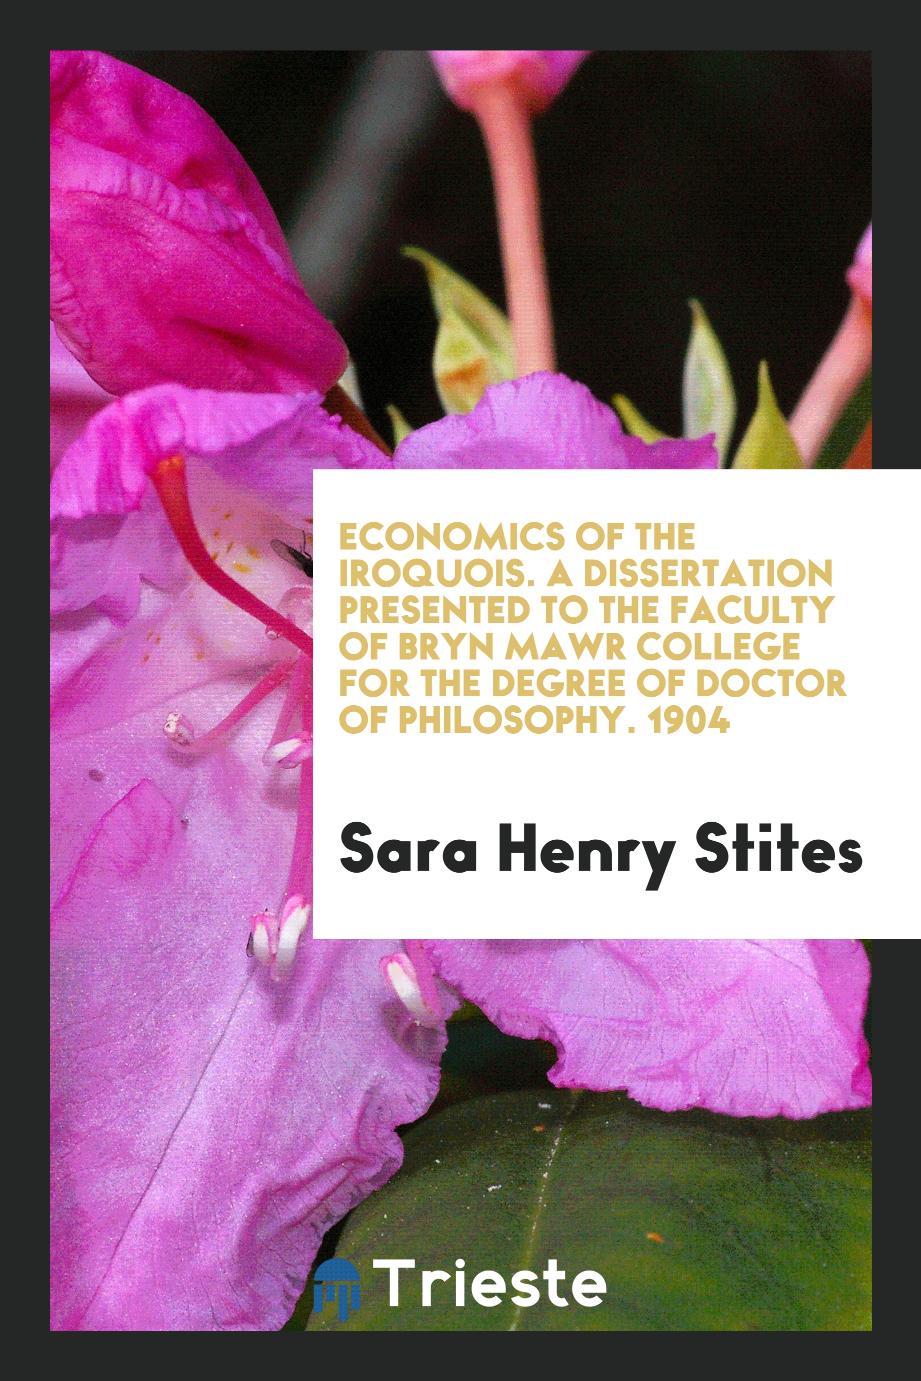 Sara Henry Stites - Economics of the Iroquois. A Dissertation Presented to the Faculty of Bryn Mawr College for the Degree of Doctor of Philosophy. 1904